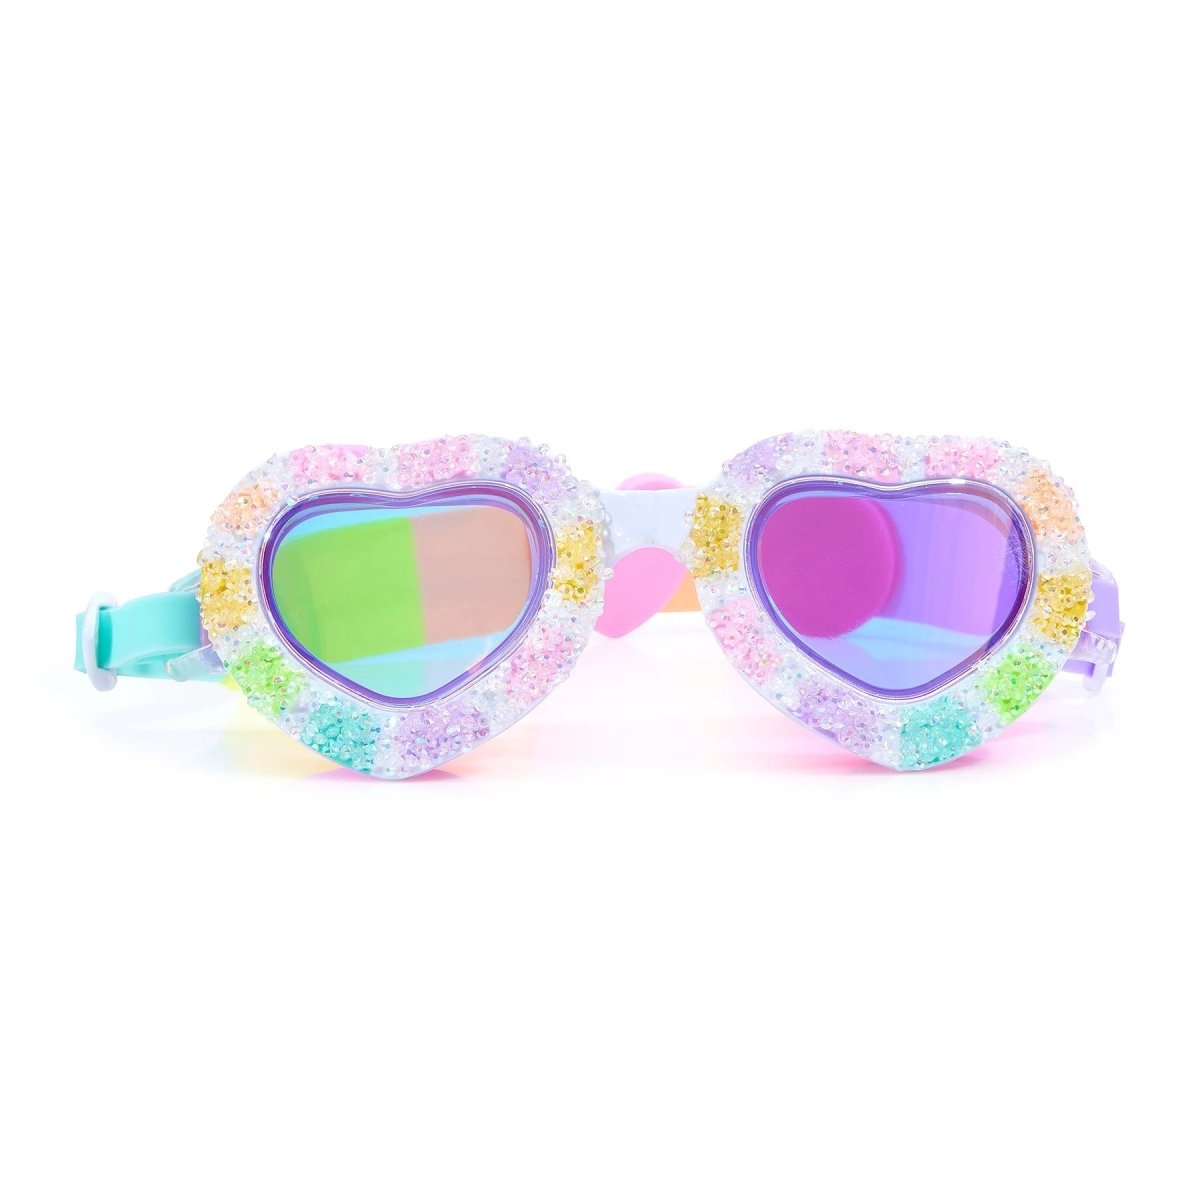 I LOVE CANDY SWEETHEARTS GOGGLES - GOGGLES